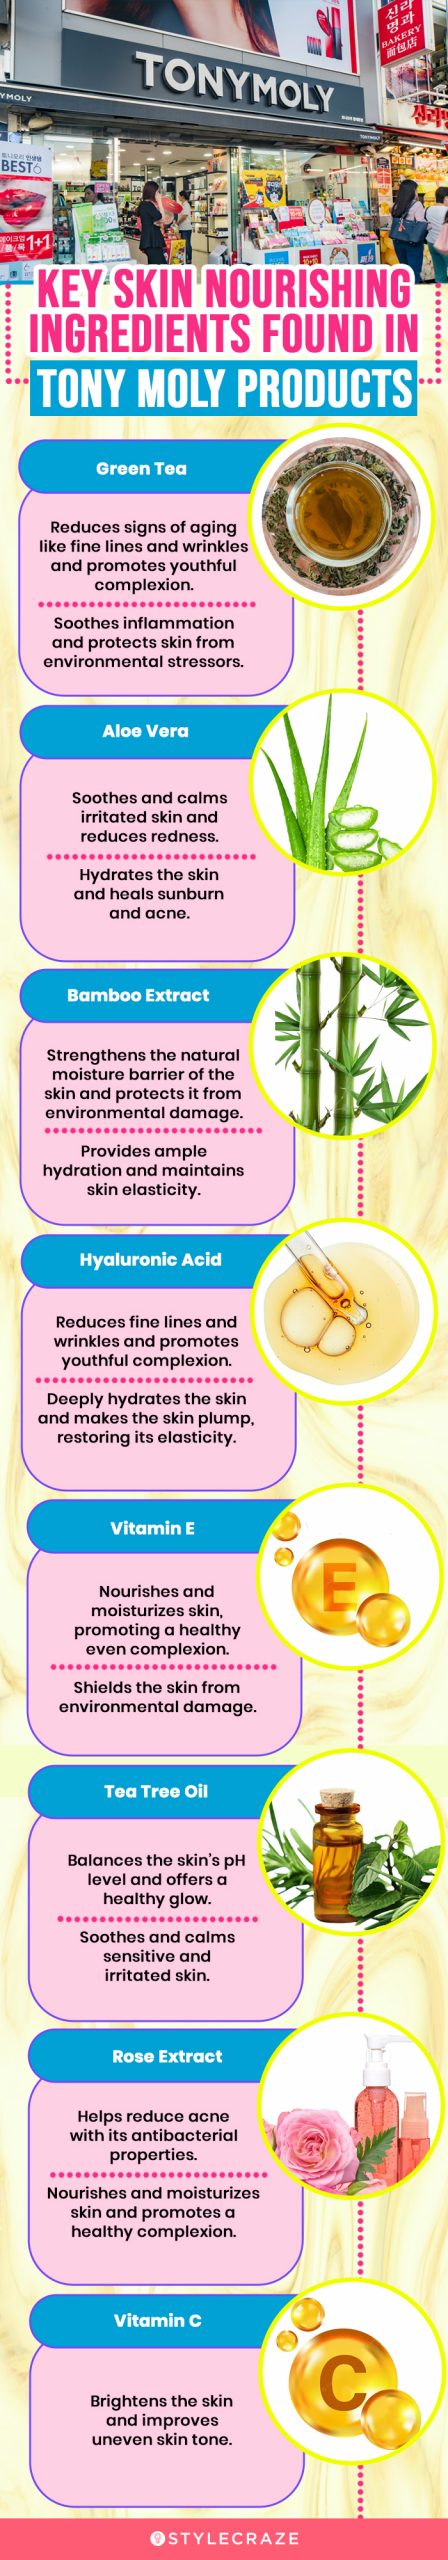  Key Skin Nourishing Ingredients Found in Tony Moly Products(infographic)